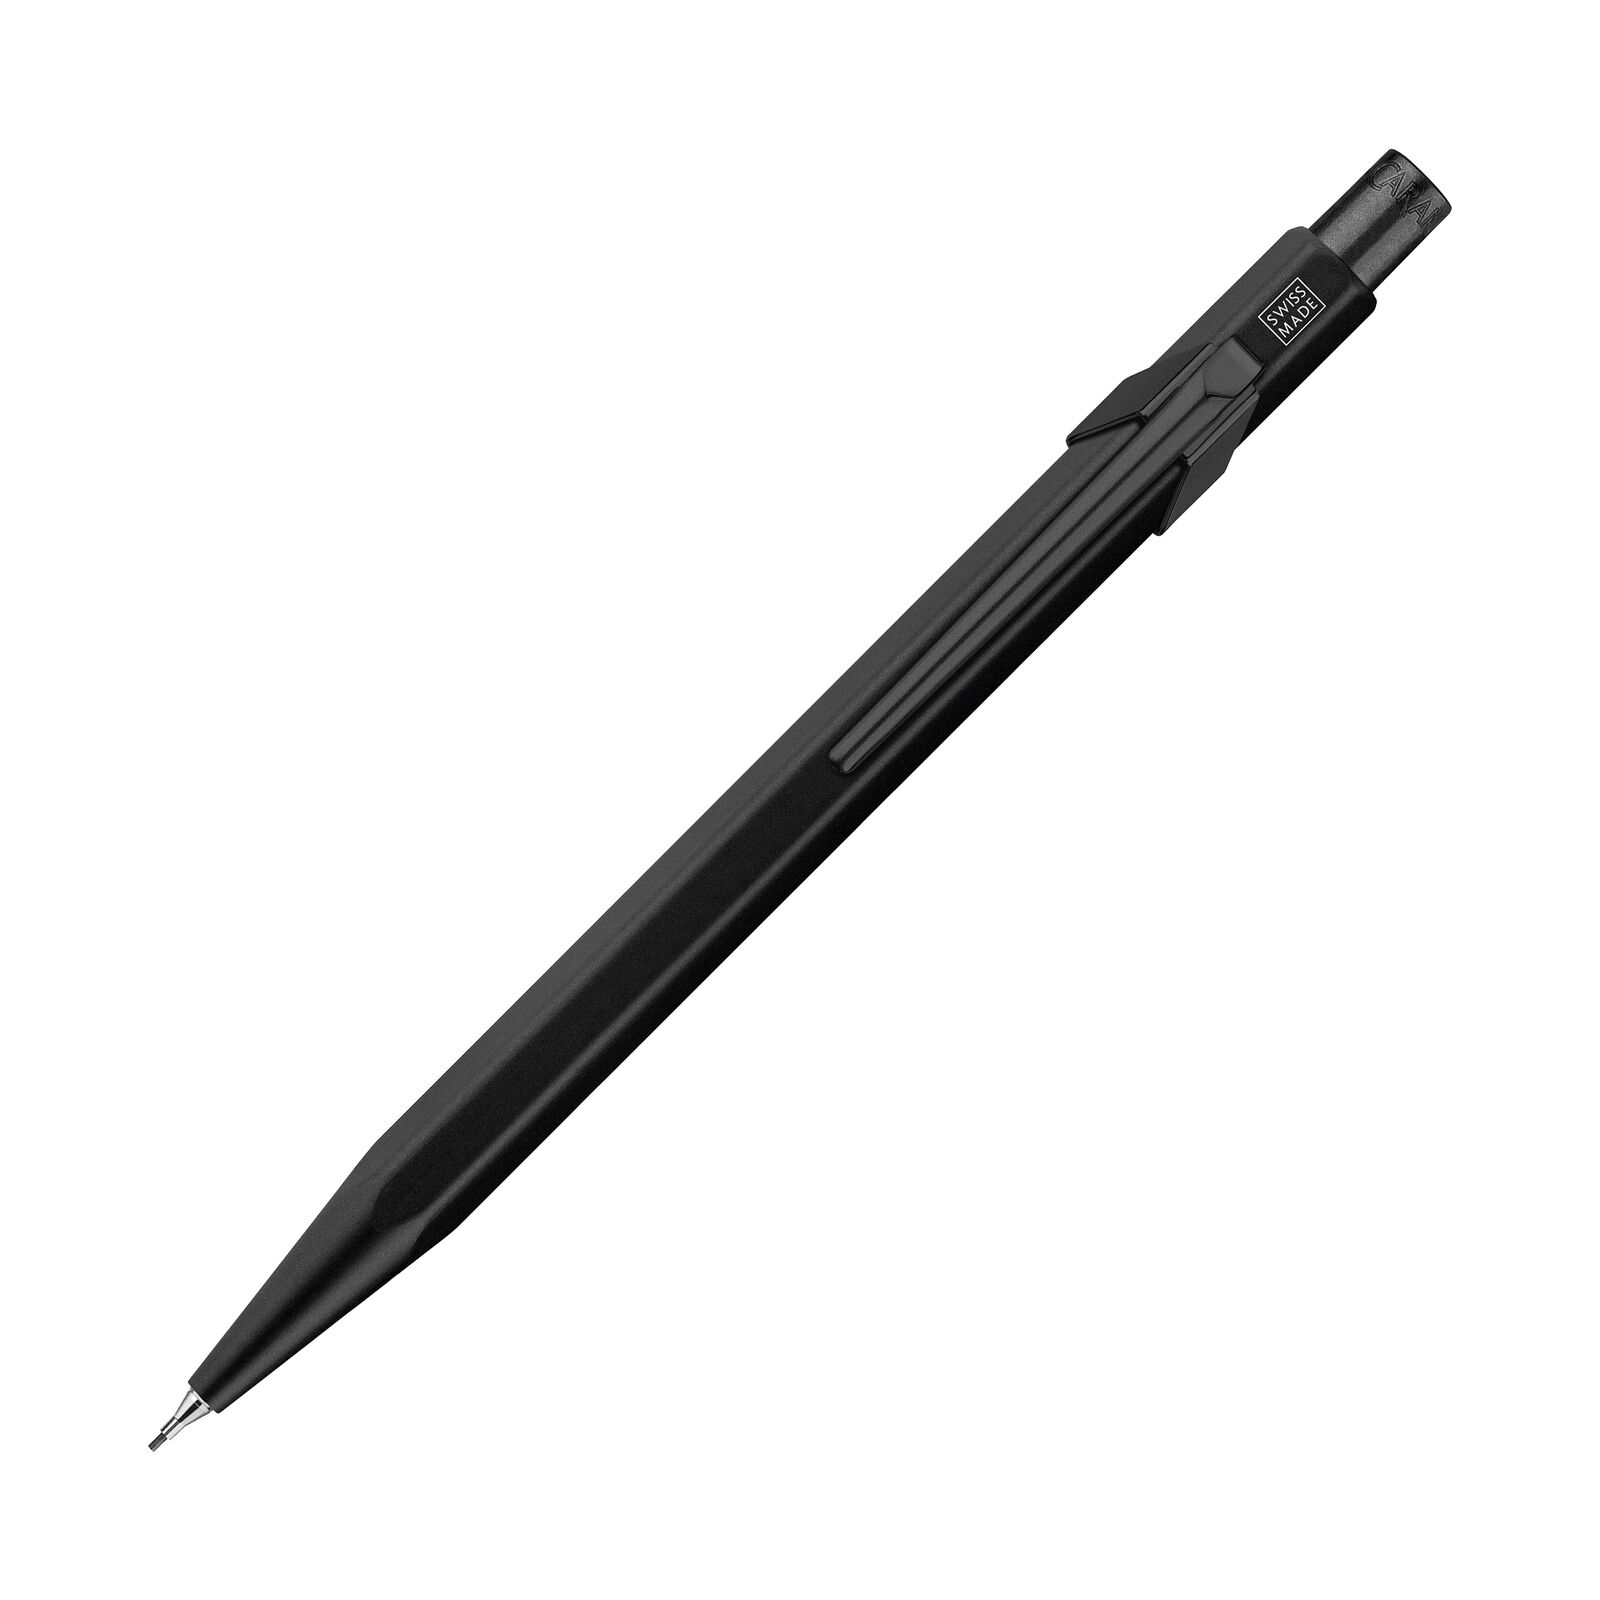 Caran d'Ache Metal Collection Mechanical Pencil in Black Code - NEW in Box